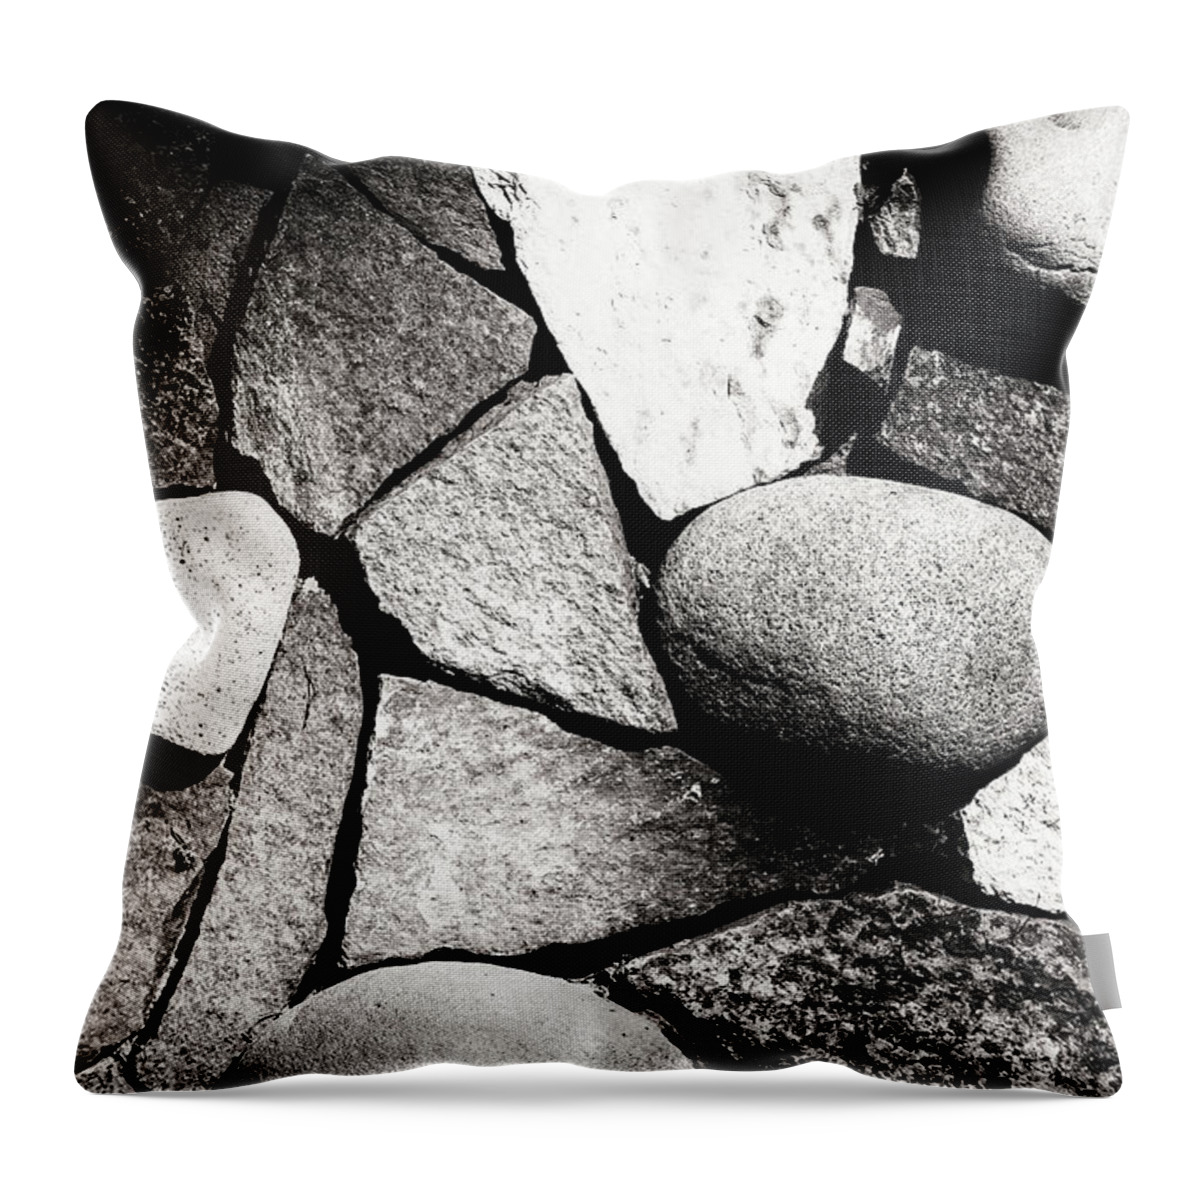 Dry Throw Pillow featuring the photograph Dry Built Stone Wall by John Williams